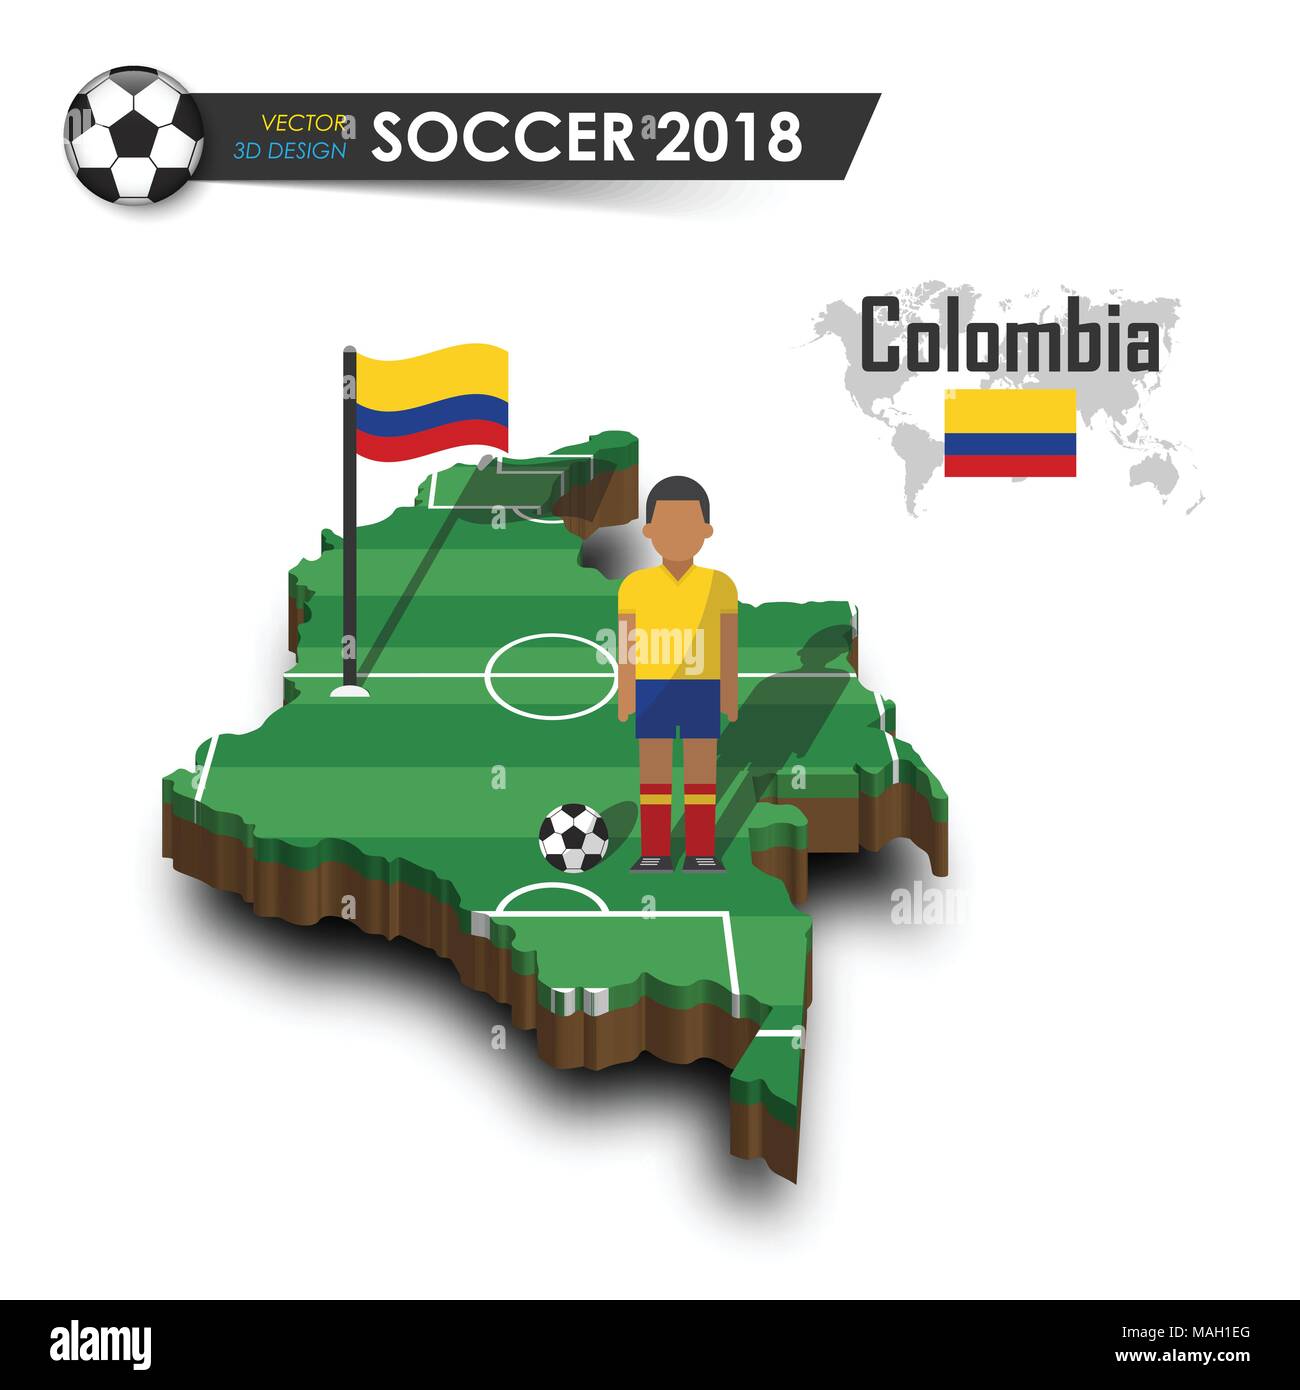 Colombia national soccer team . Football player and flag on 3d design country map . isolated background . Vector for international world championship  Stock Vector